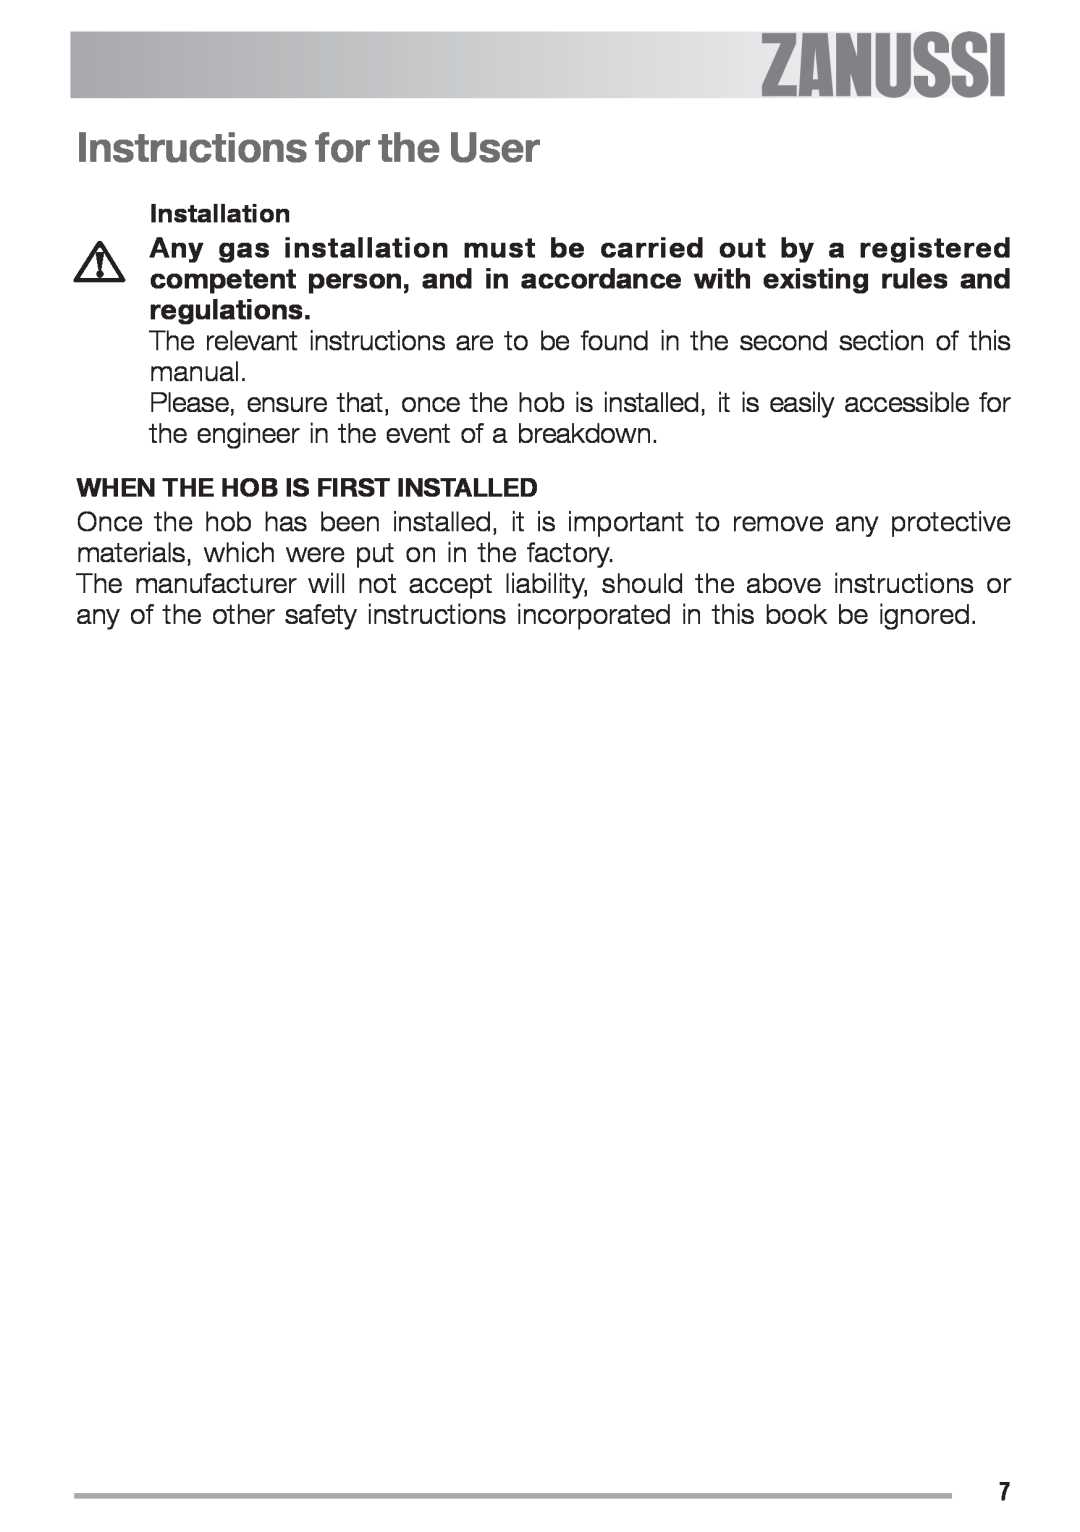 Zanussi ZGS 682 ICT manual Instructions for the User, Installation, When The Hob Is First Installed 